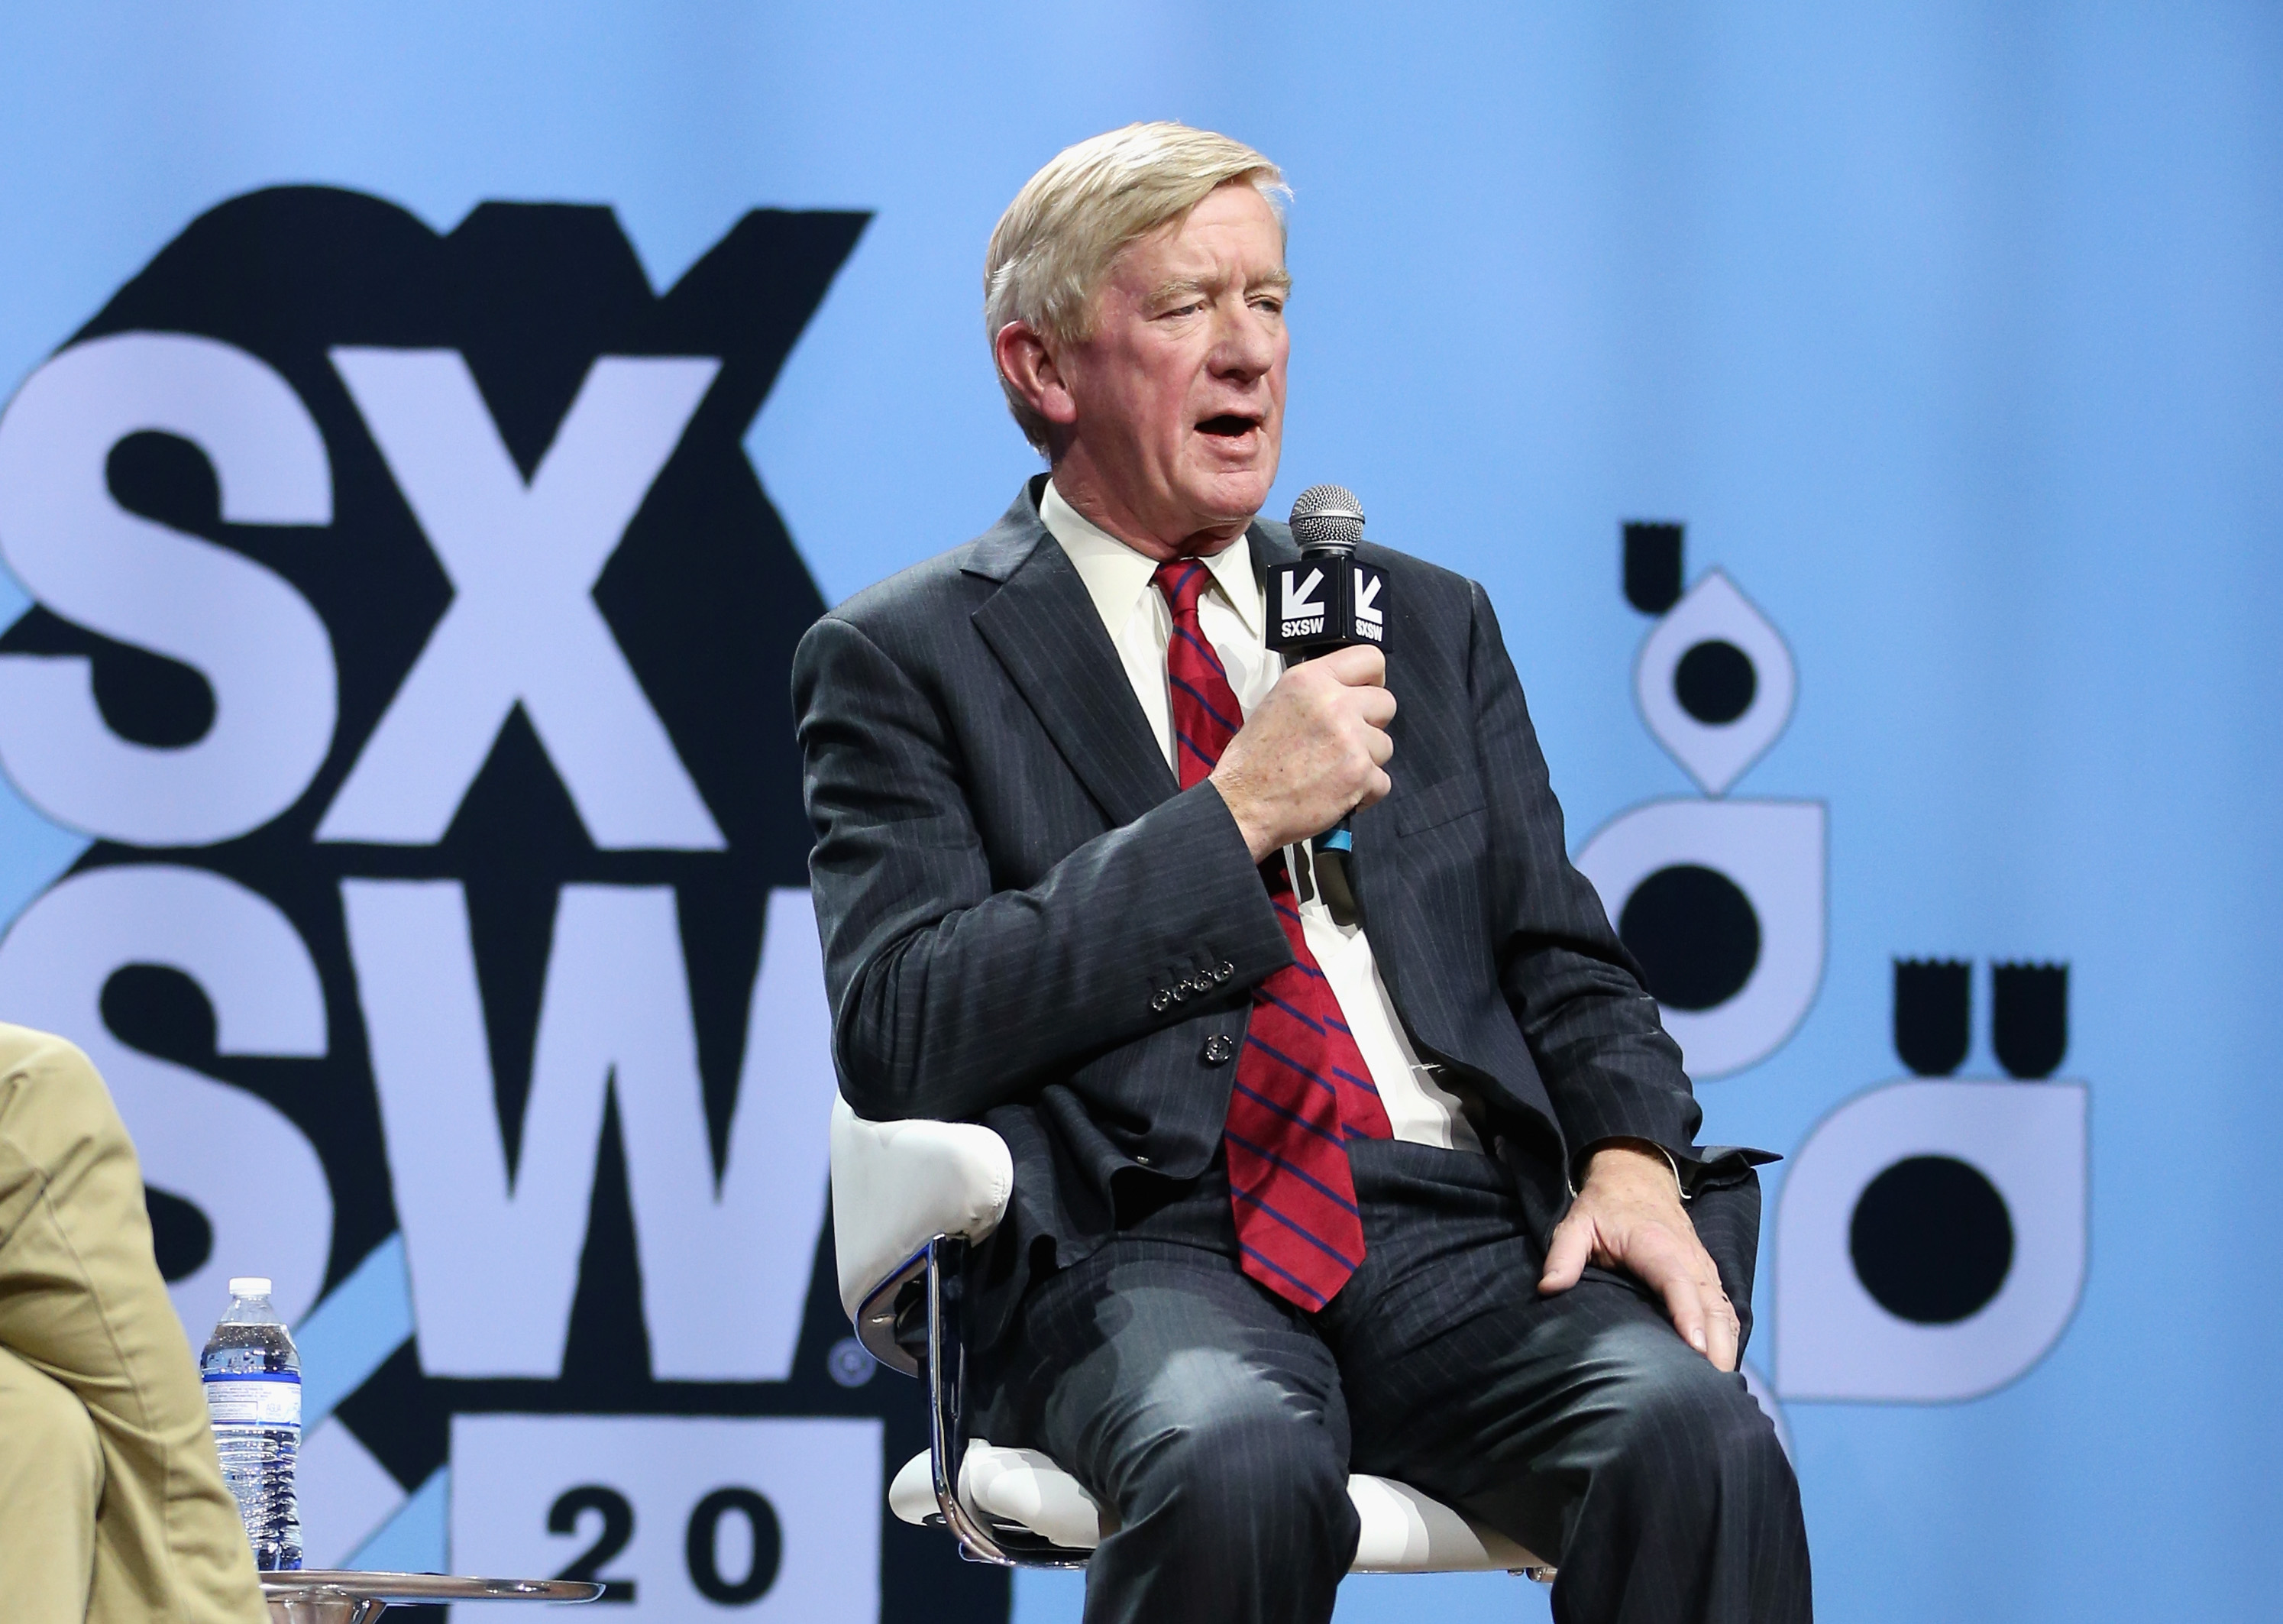 Conversations About America's Future: Former Governor Bill Weld- 2019 SXSW Conference and Festivals